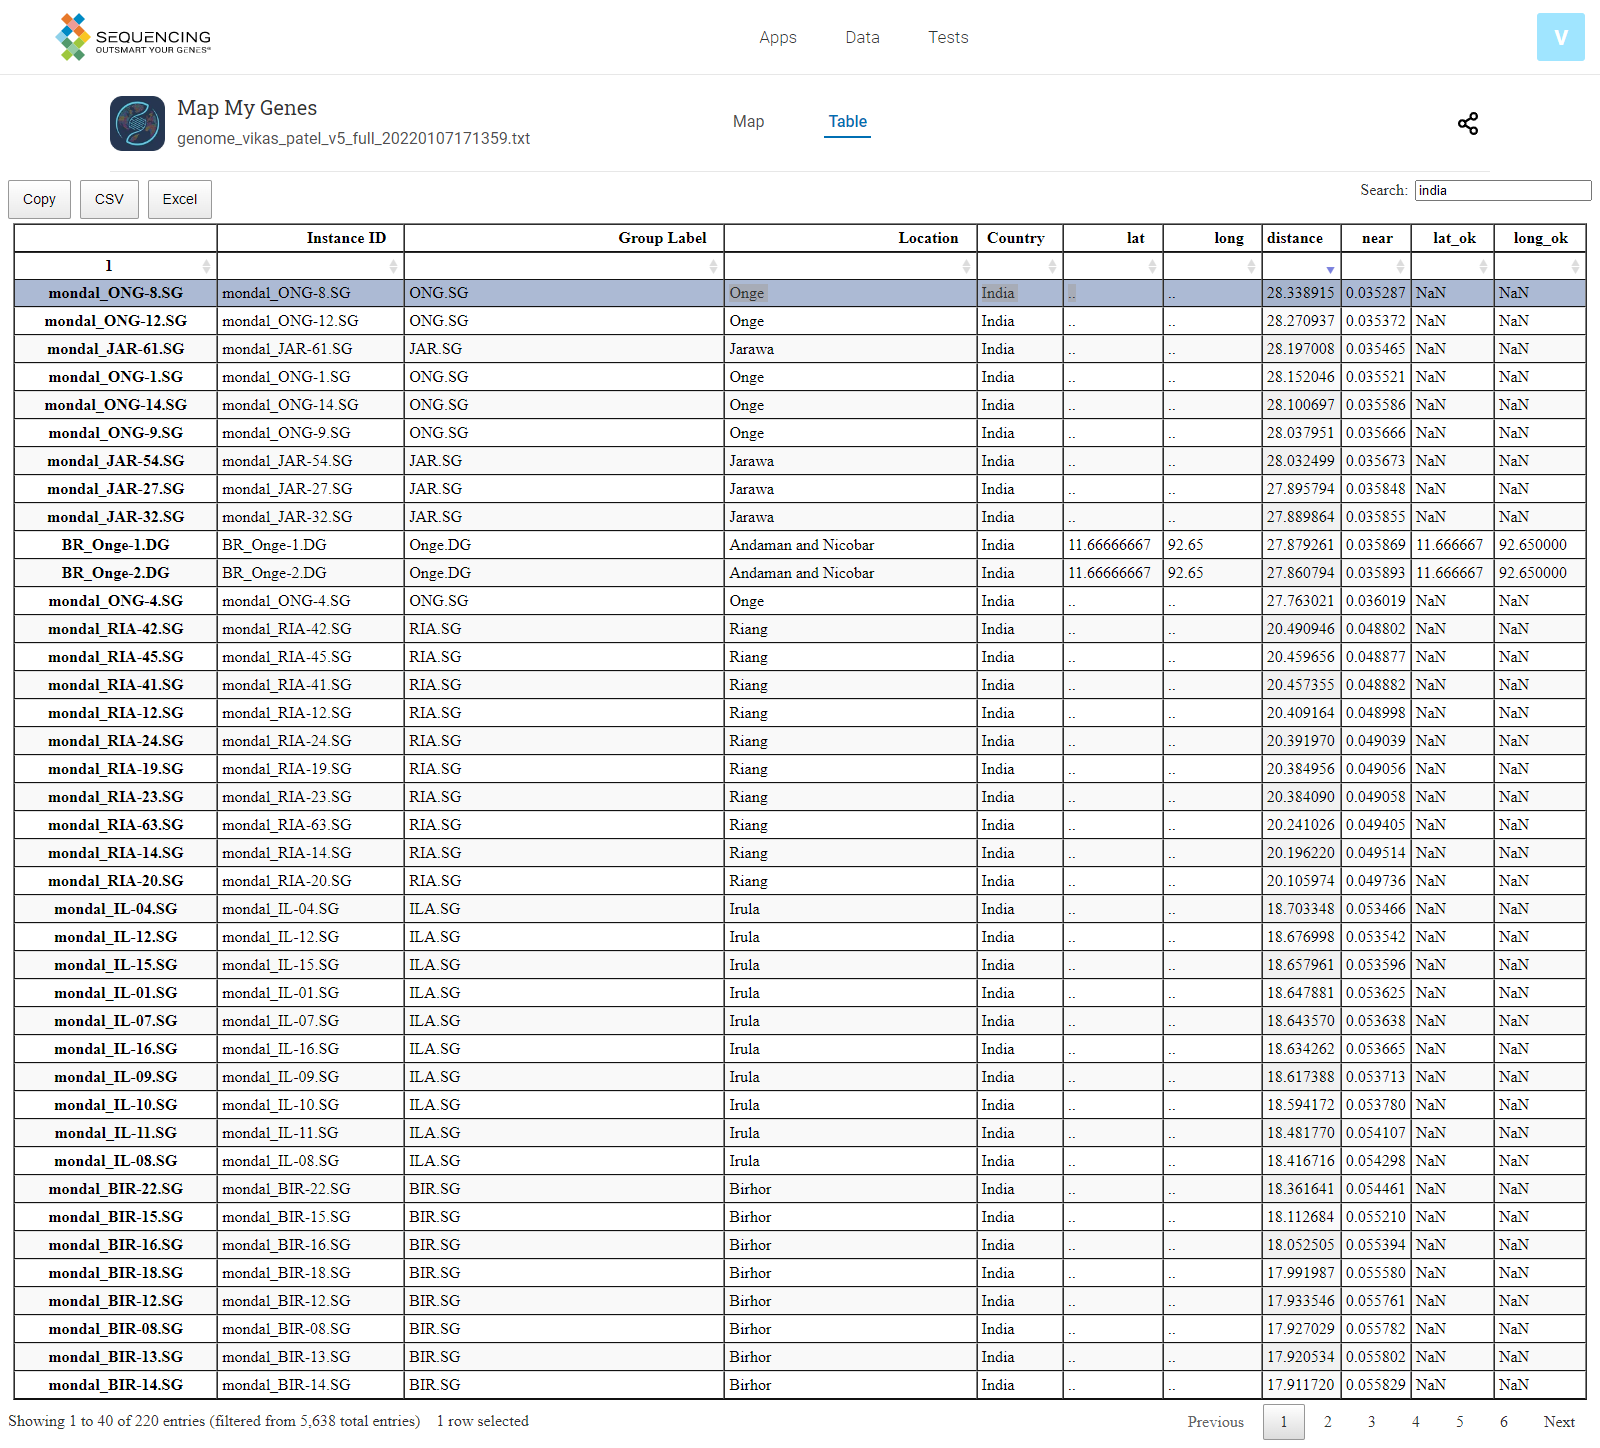 screencapture-sequencing-dna-apps-map-my-genes-results-8708960-table-20 (1).png